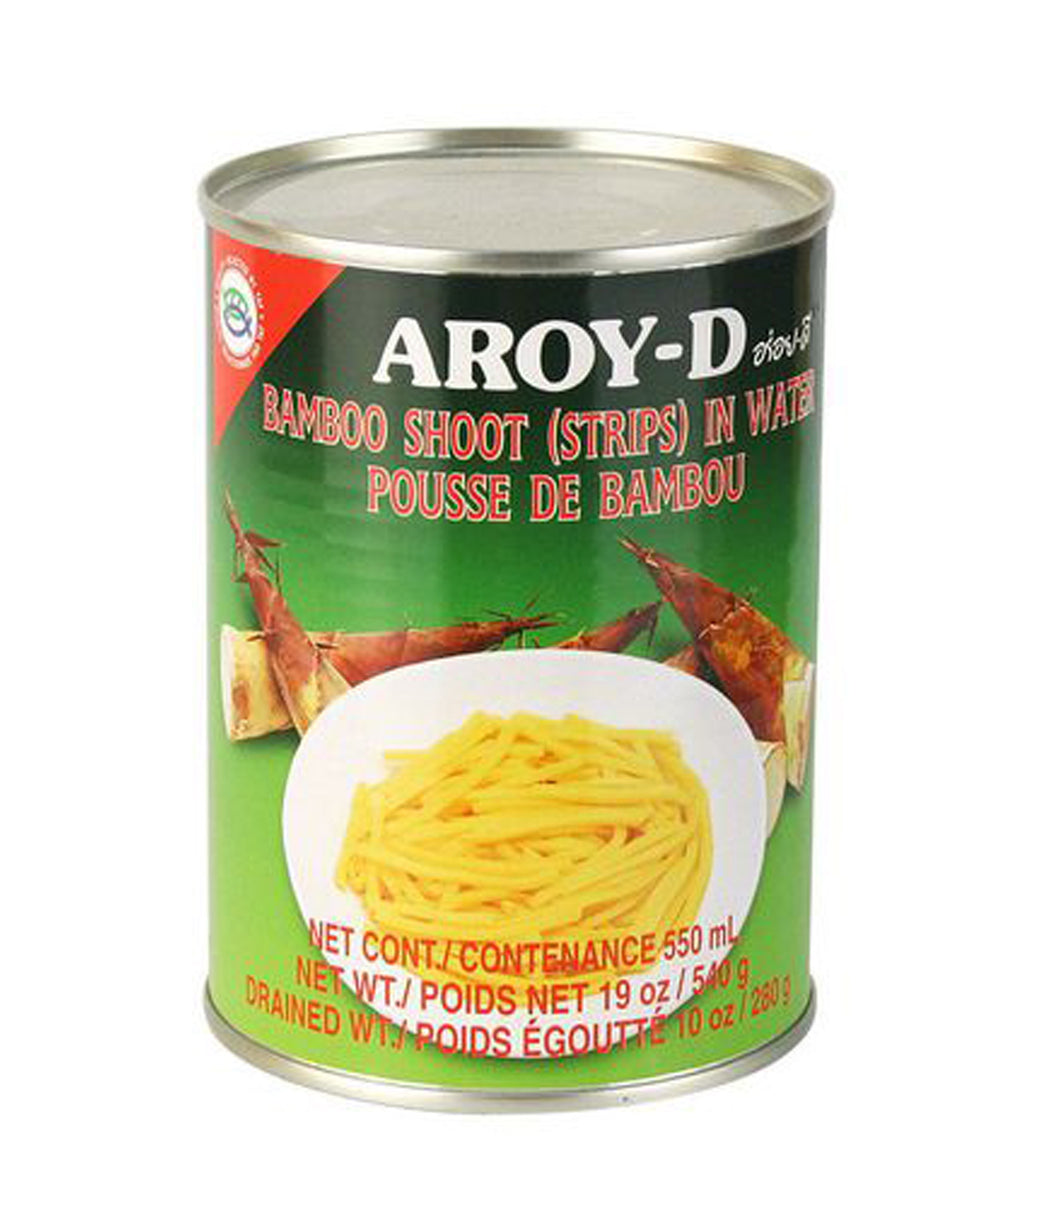 Aroy-D - Bamboo Shoot (Strips in Water) หน่อไม้ แบบฝอย